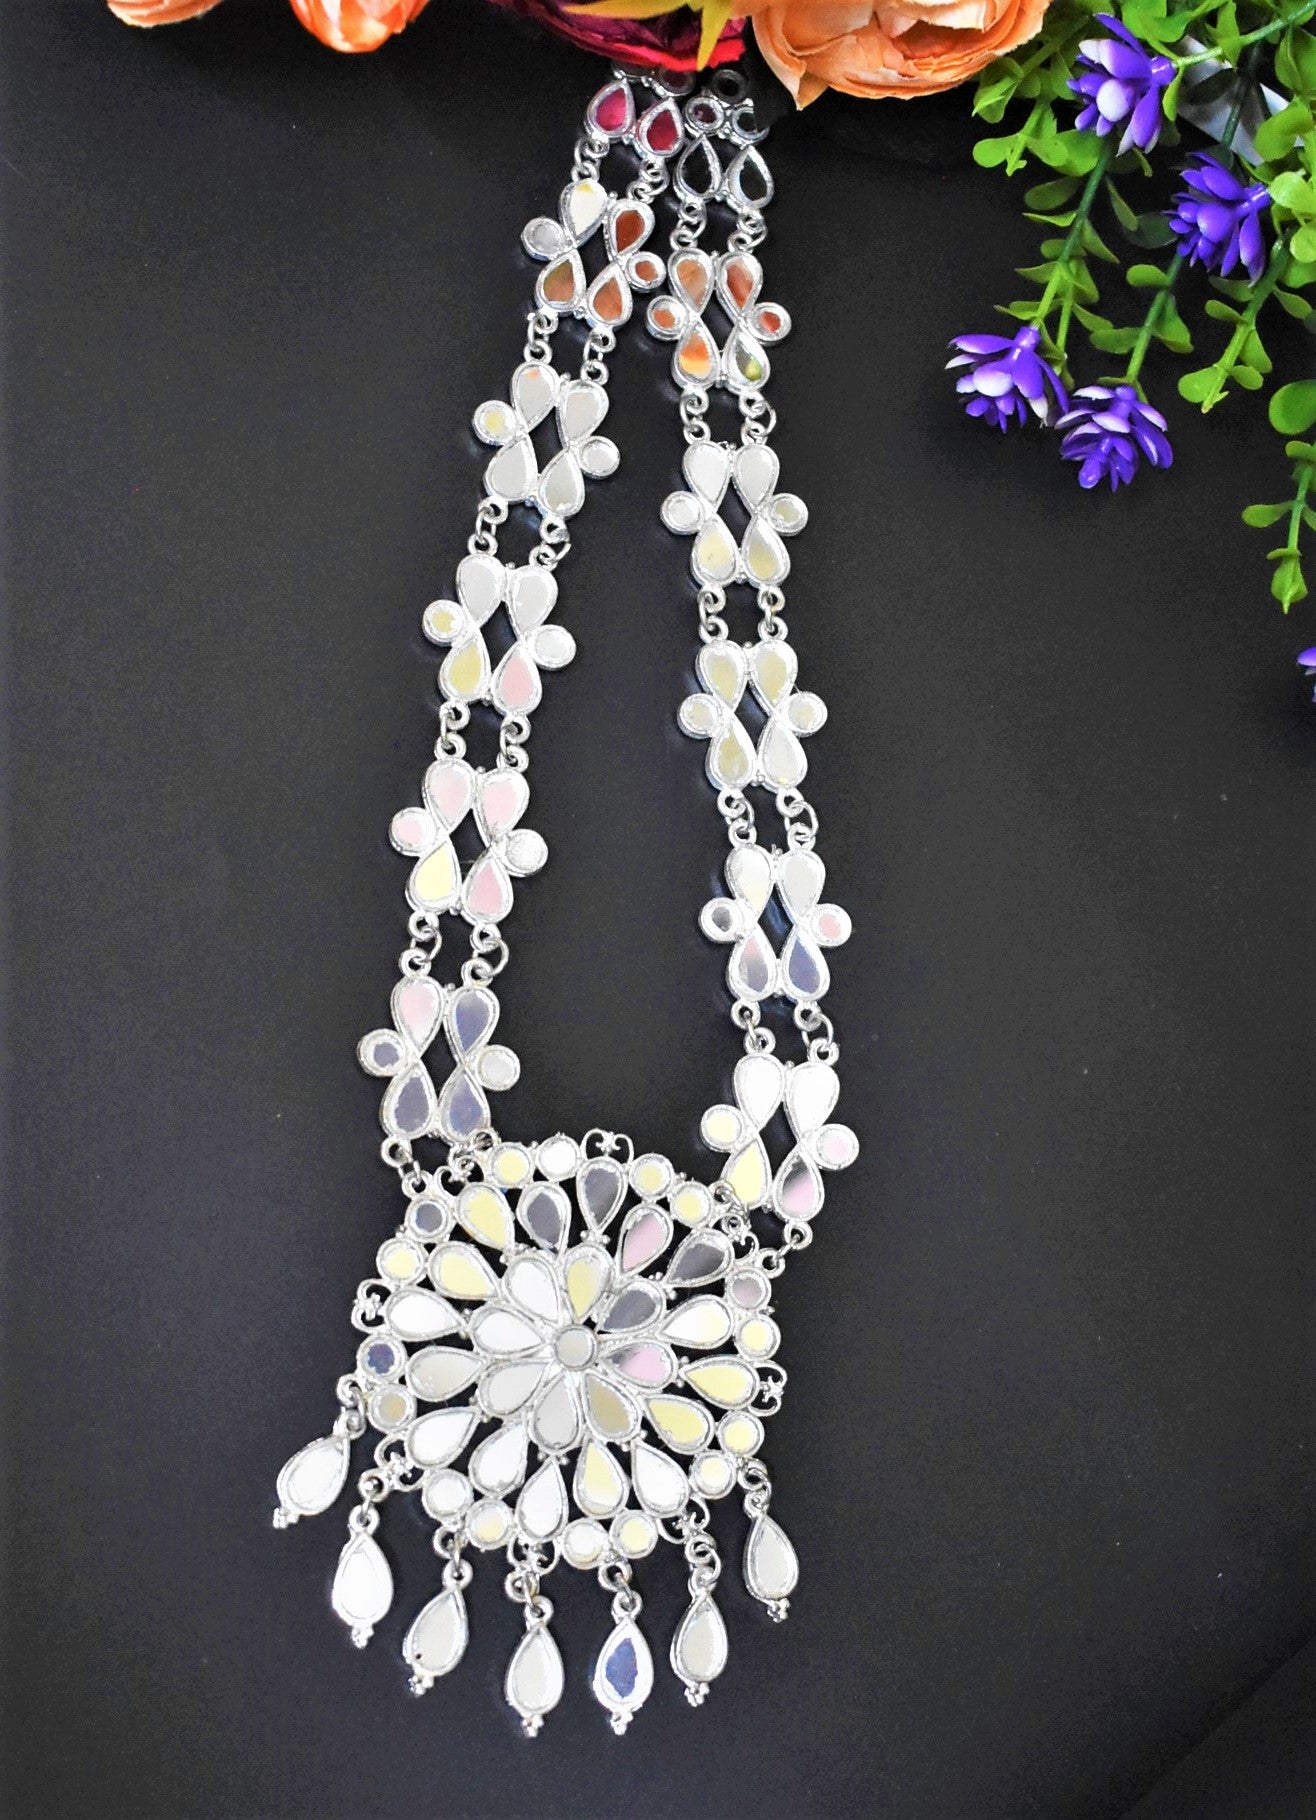 HAND CUT GLASS MIRROR NECKLACE